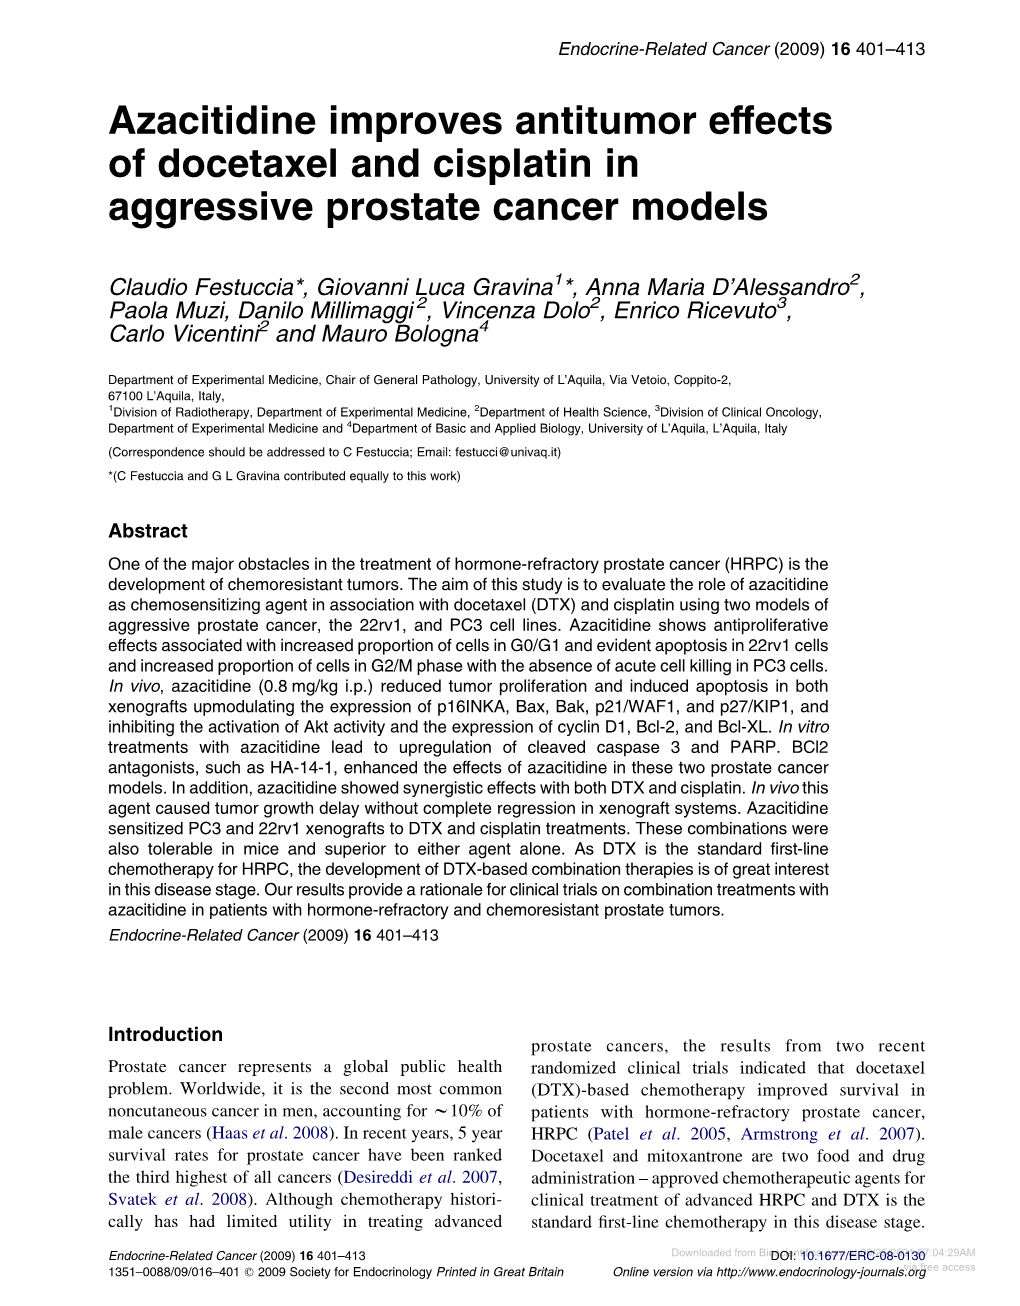 Azacitidine Improves Antitumor Effects of Docetaxel and Cisplatin in Aggressive Prostate Cancer Models